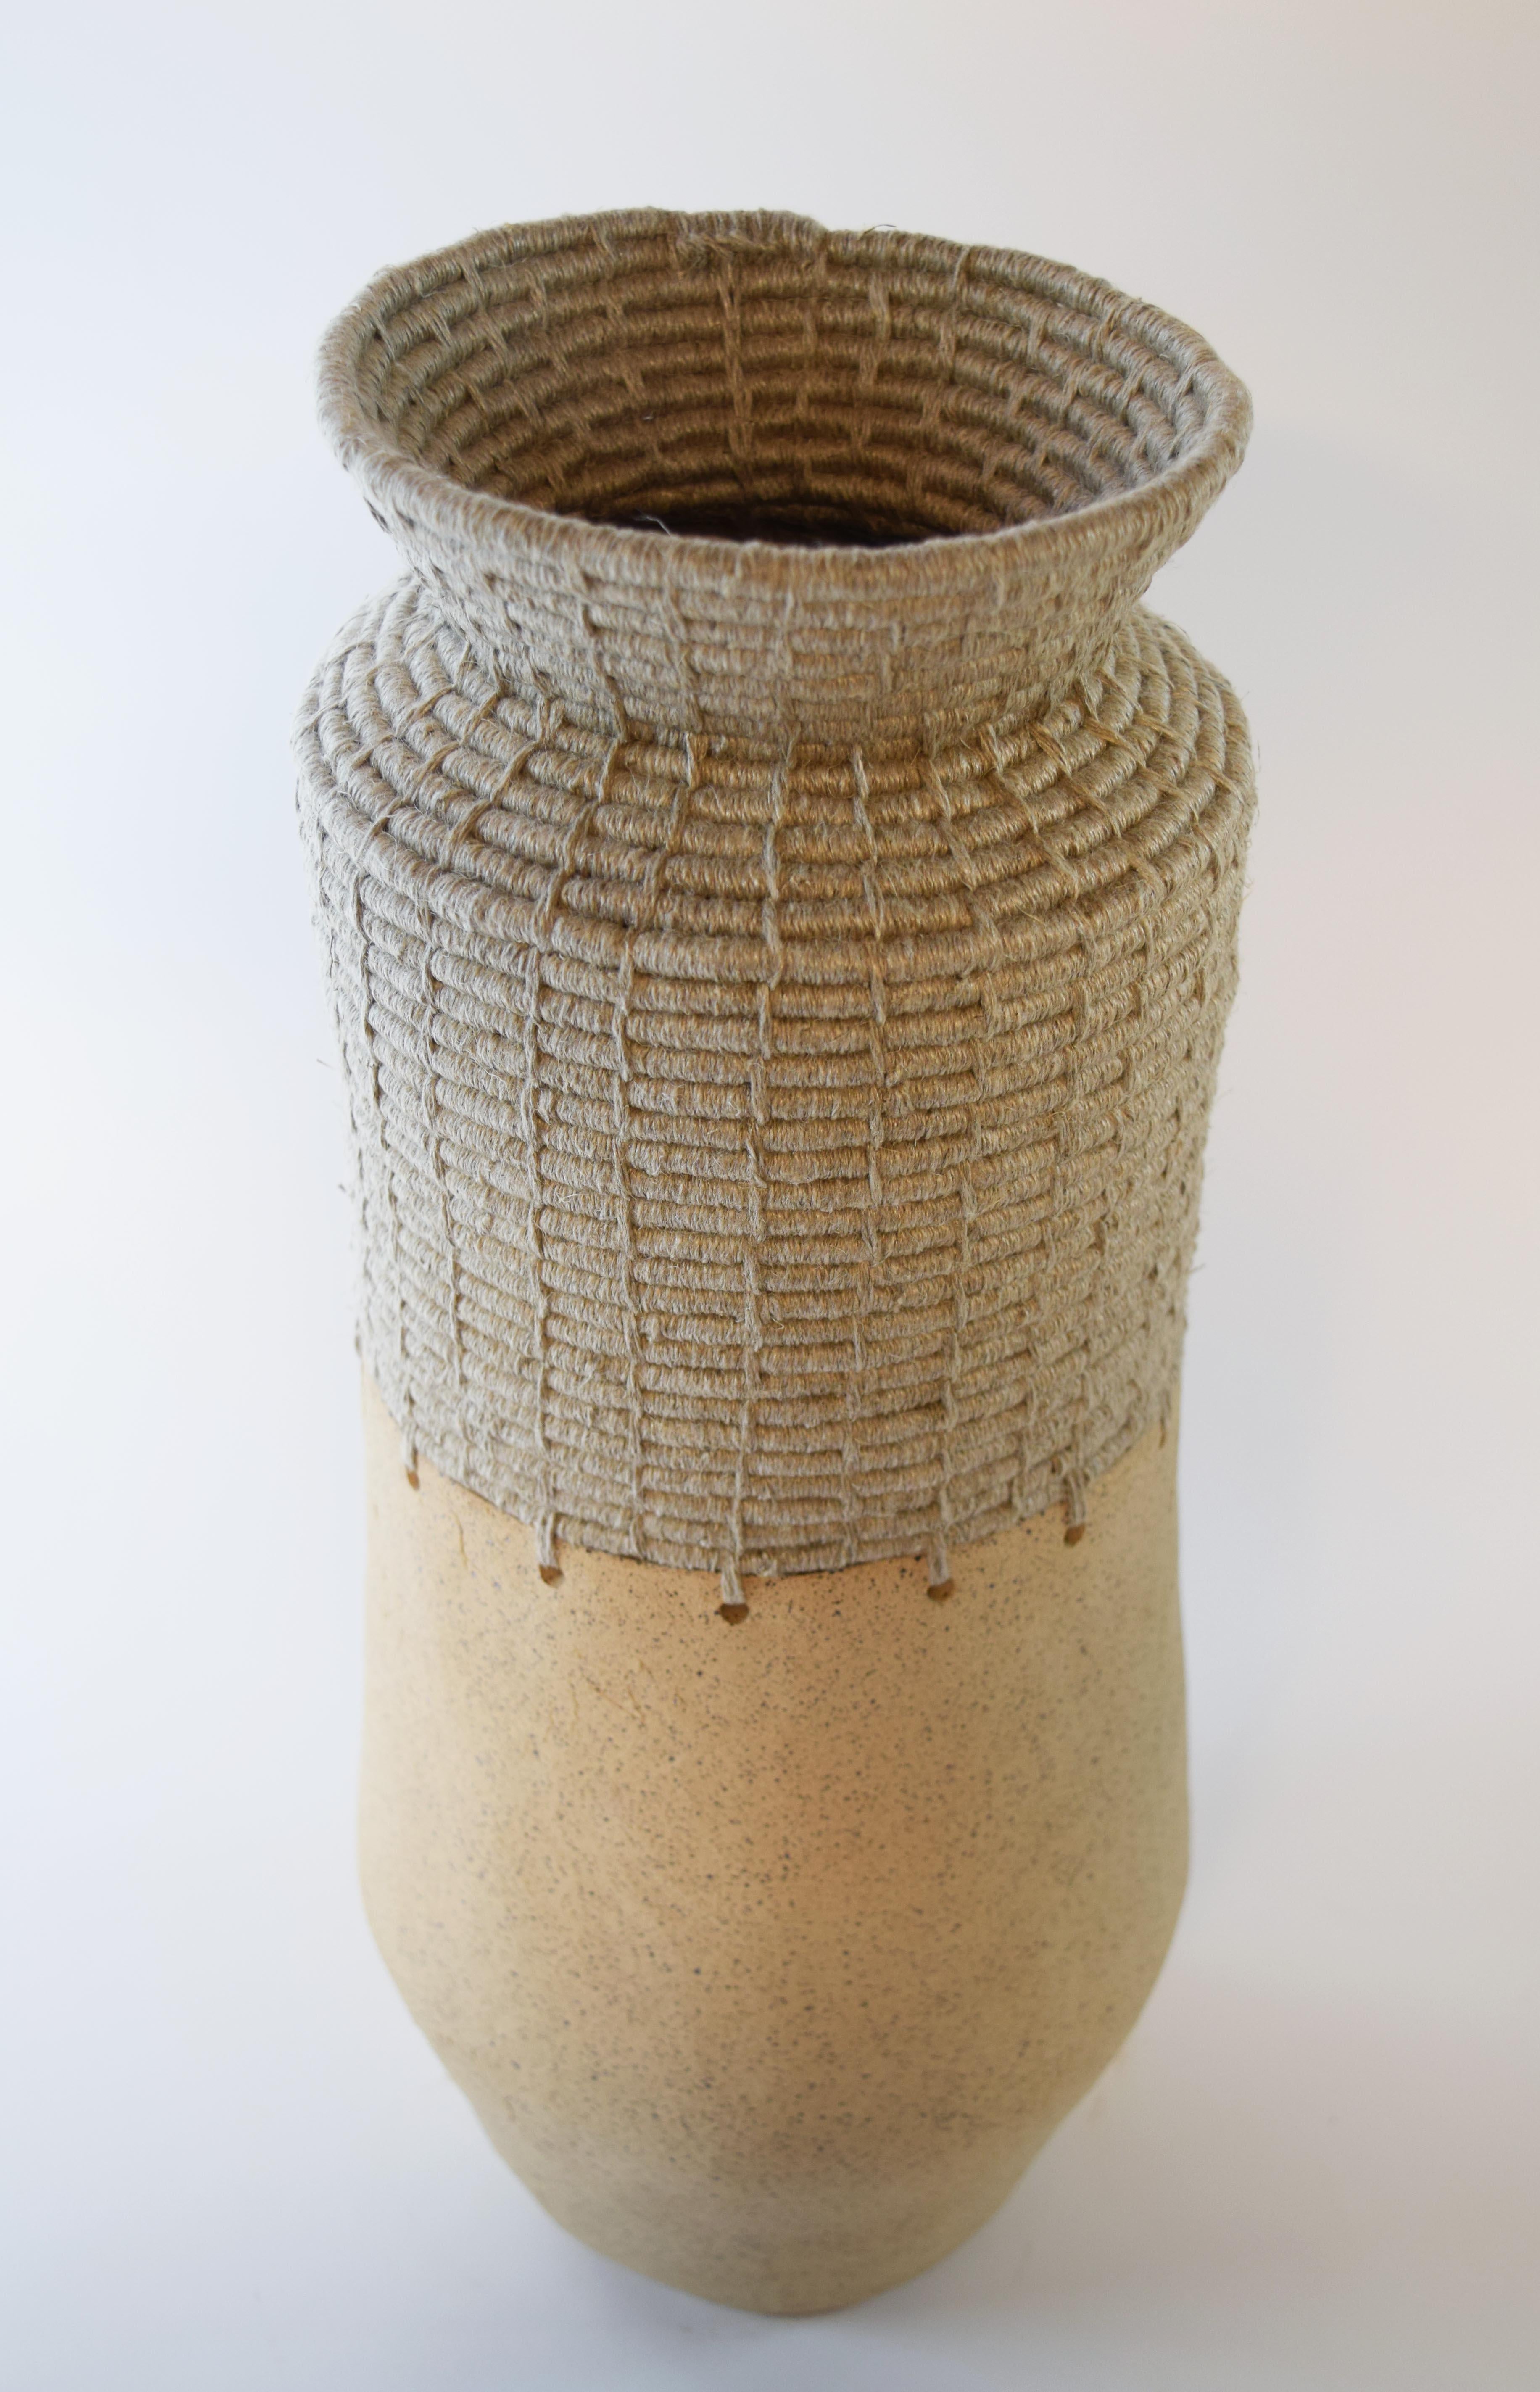 Organic Modern One of a Kind Ceramic & Fiber Vessel #763 - Speckled Clay, Woven Natural Linen